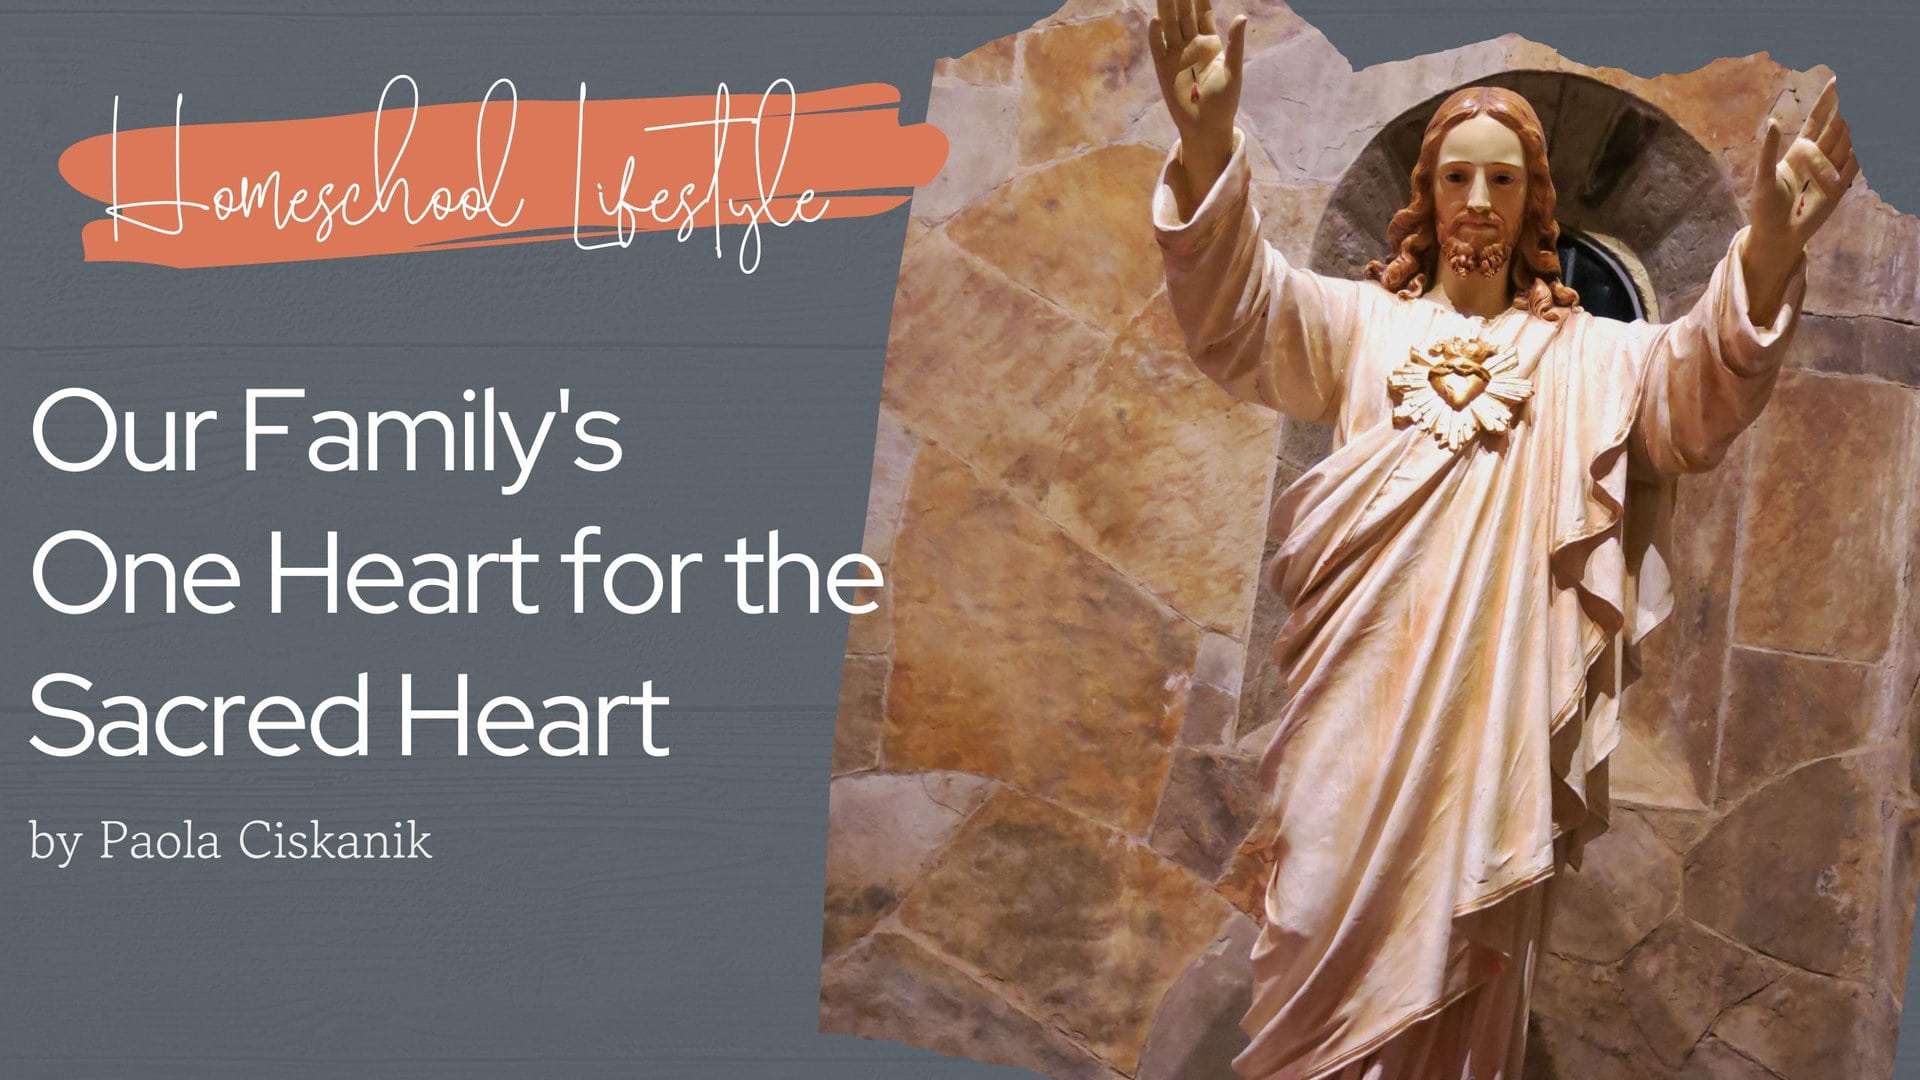 Our Family’s One Heart for the Sacred Heart